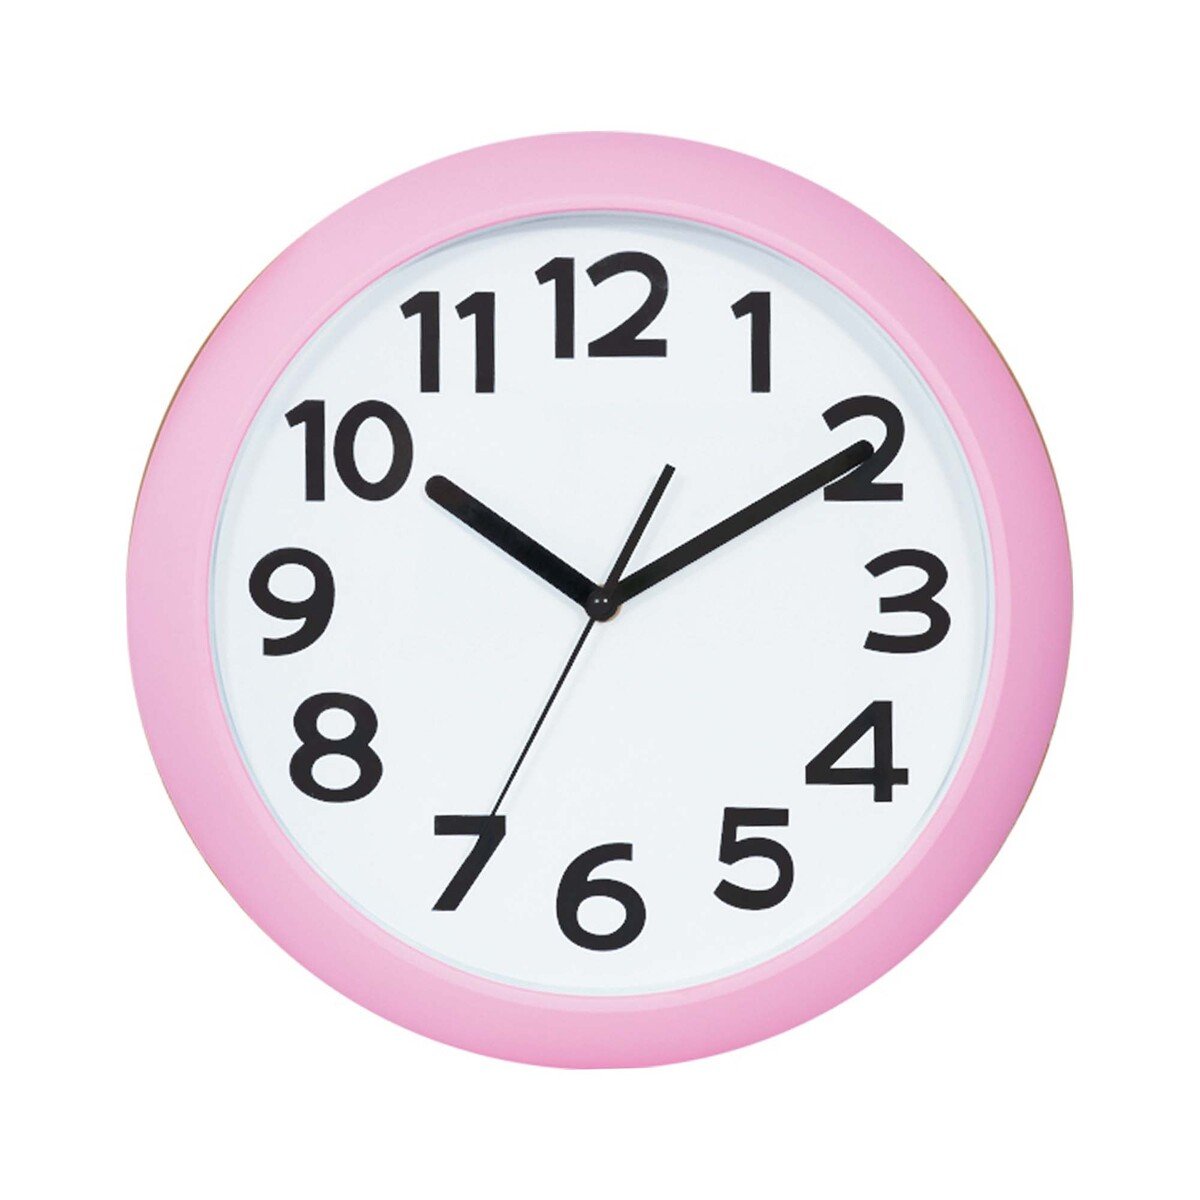 Maple Leaf Battery Operated PVC Wall Clock 34.7x34.7x4.8cm TLD3616D